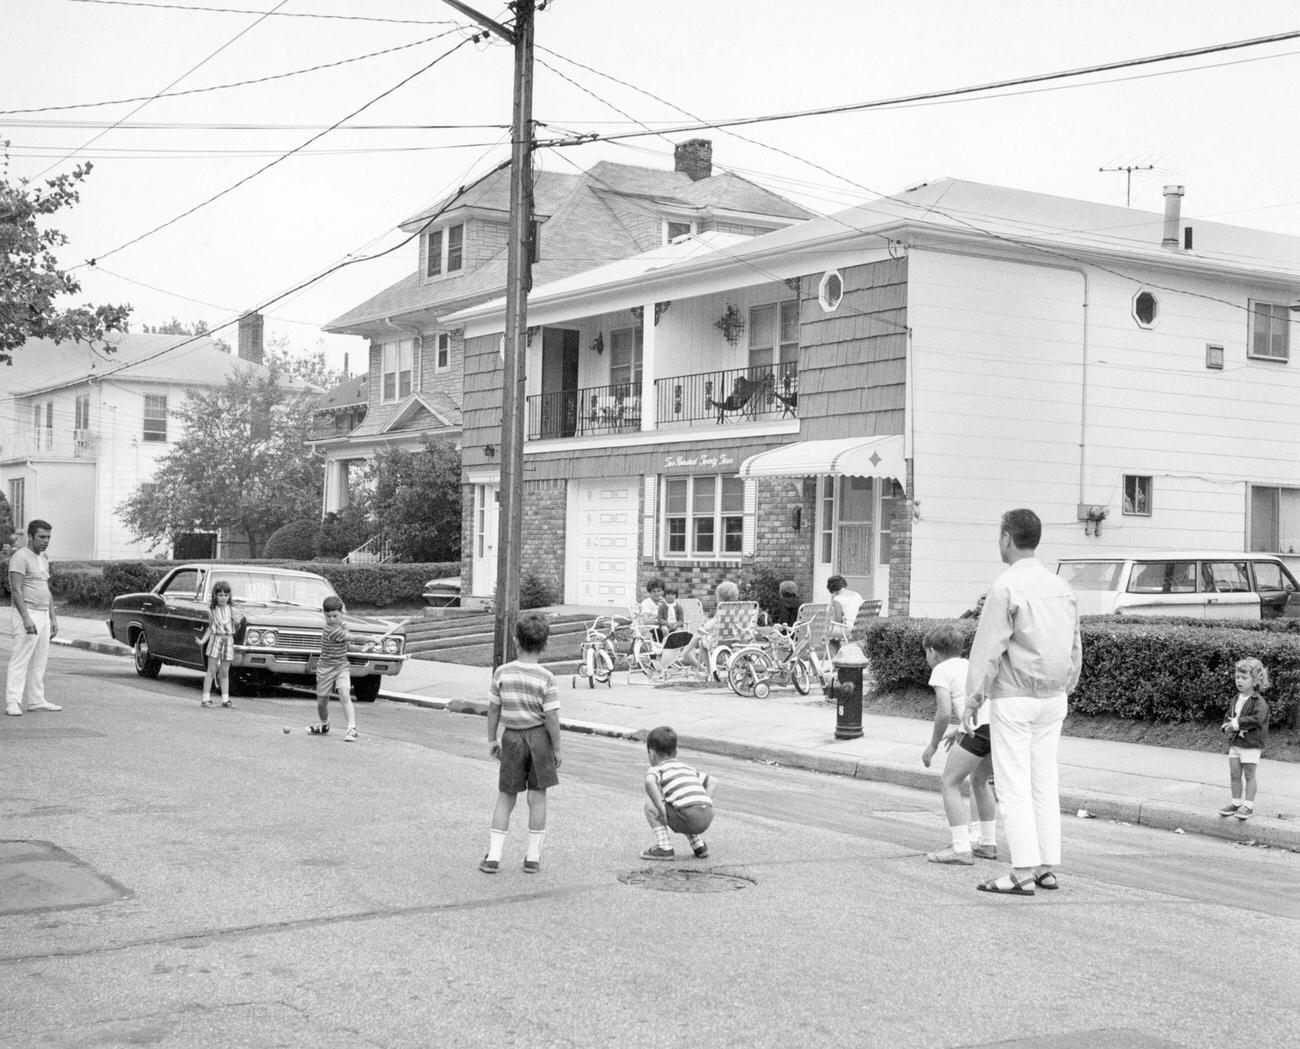 Residential Street With Children Playing, Coney Island, 1969